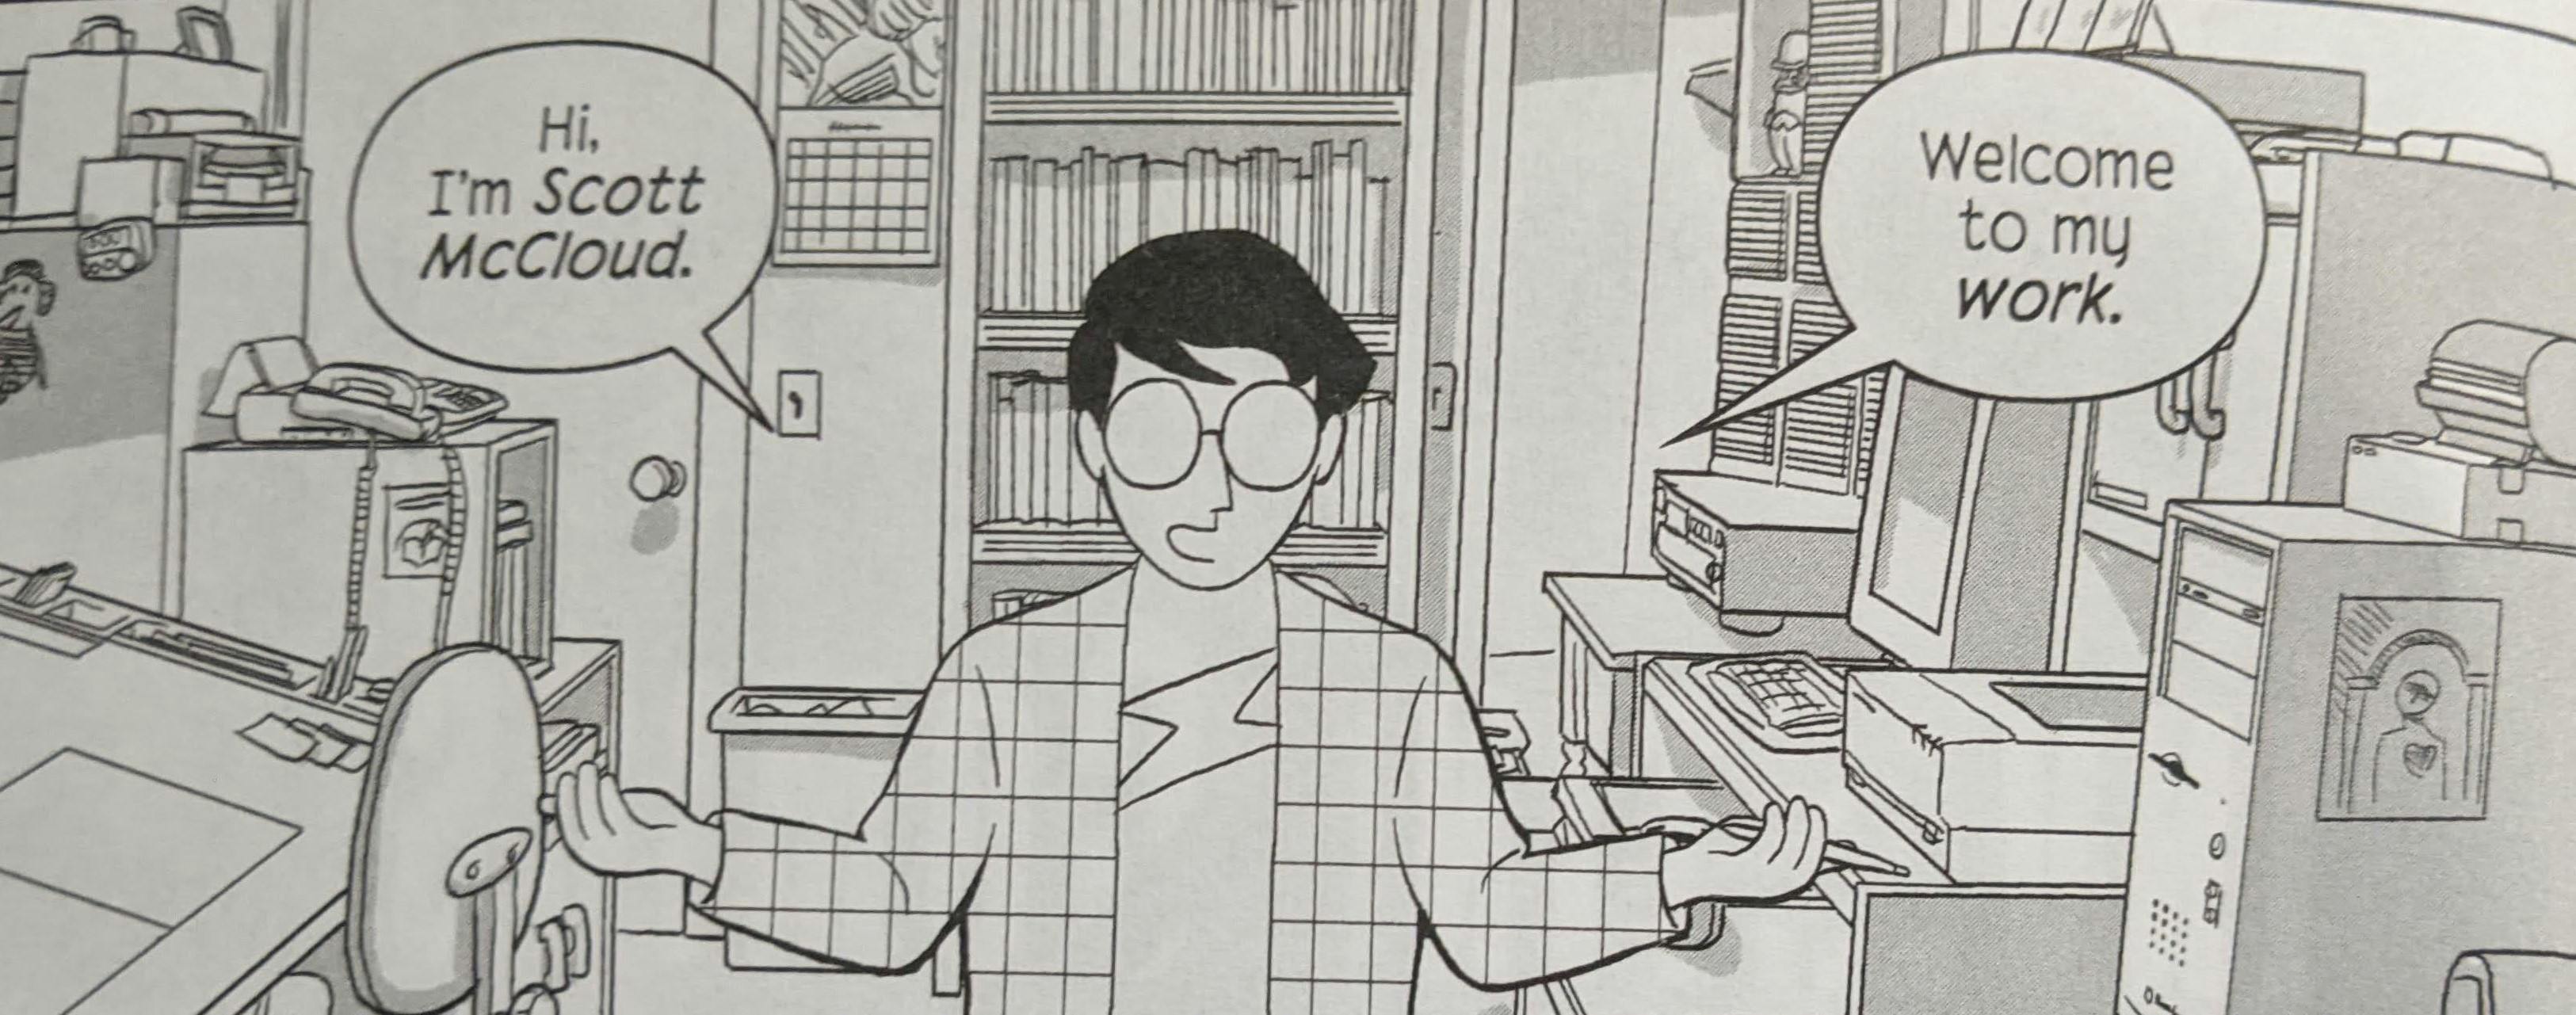 Exerpt from a comic by Scott McCloud that reads "Hi, I'm Scott McCloud. Welcome to my work."